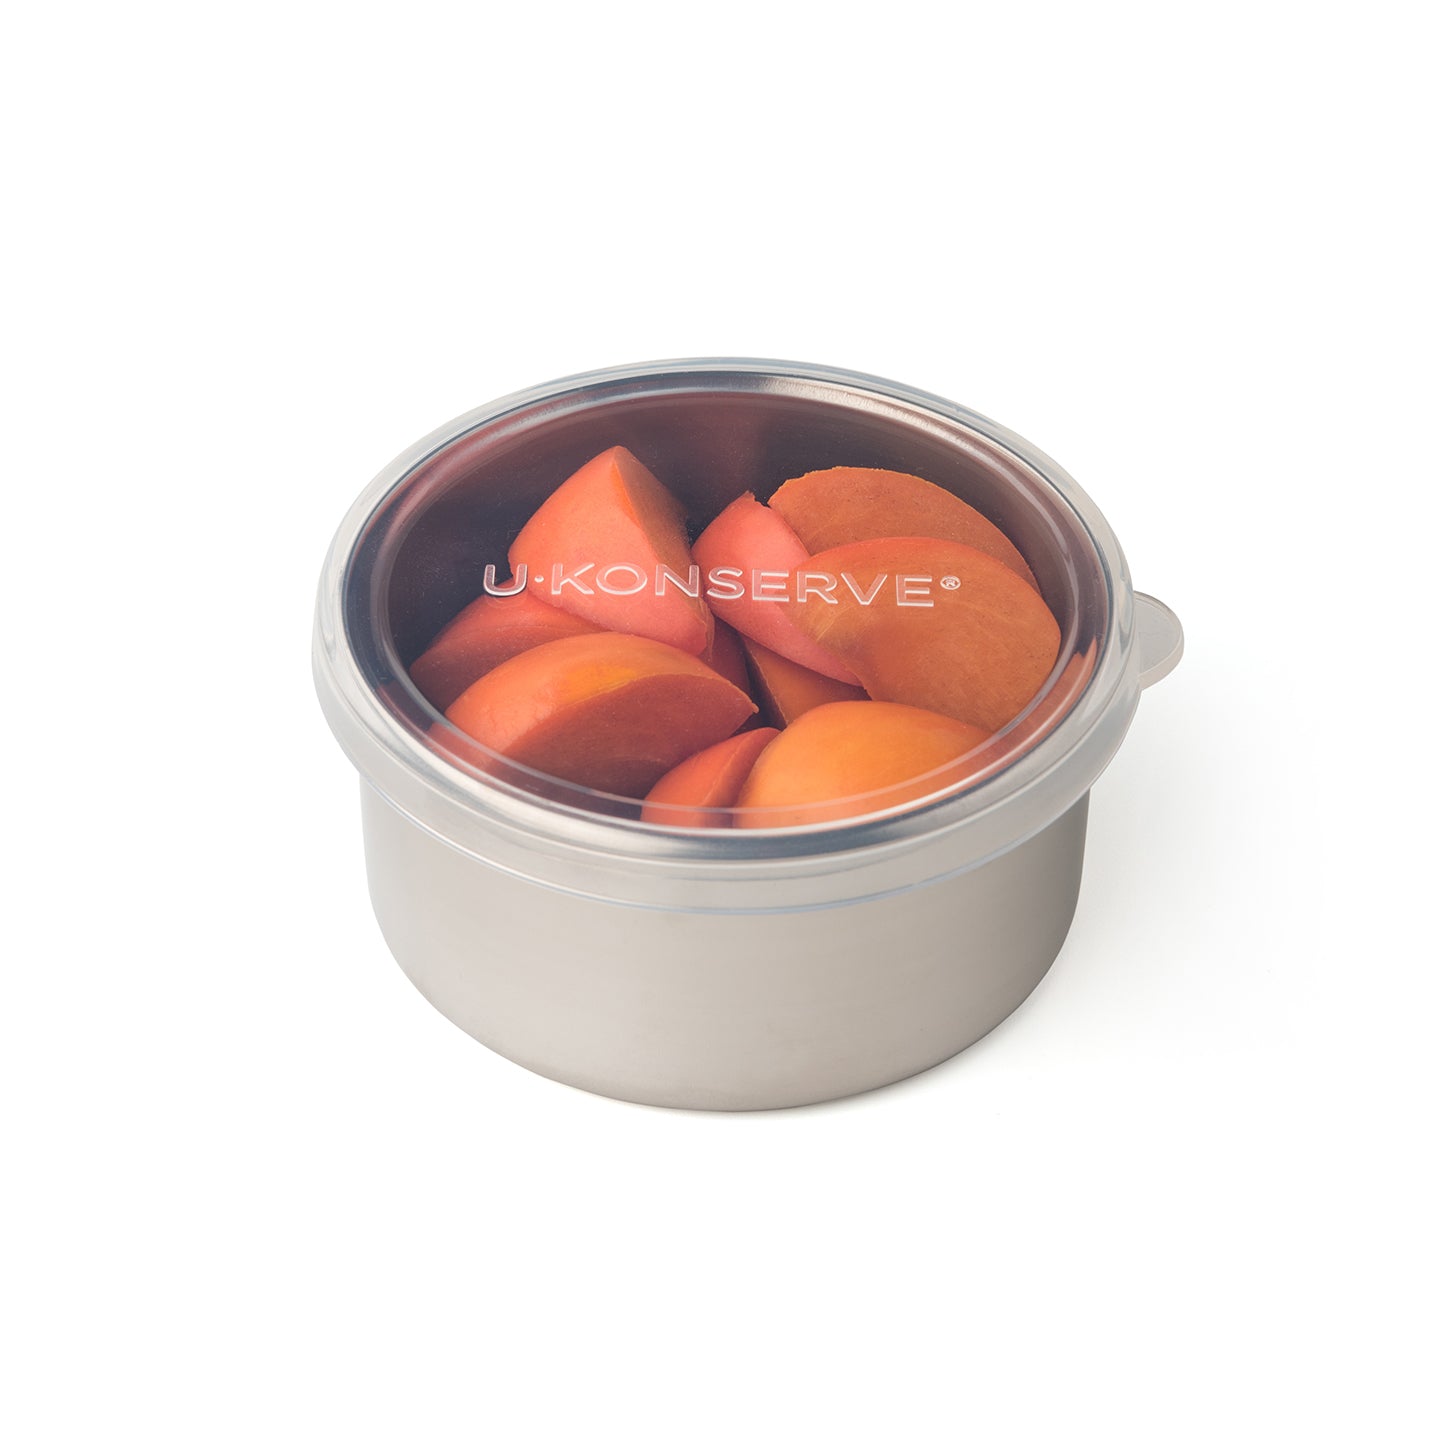 Stainless Steel Containers With Lids